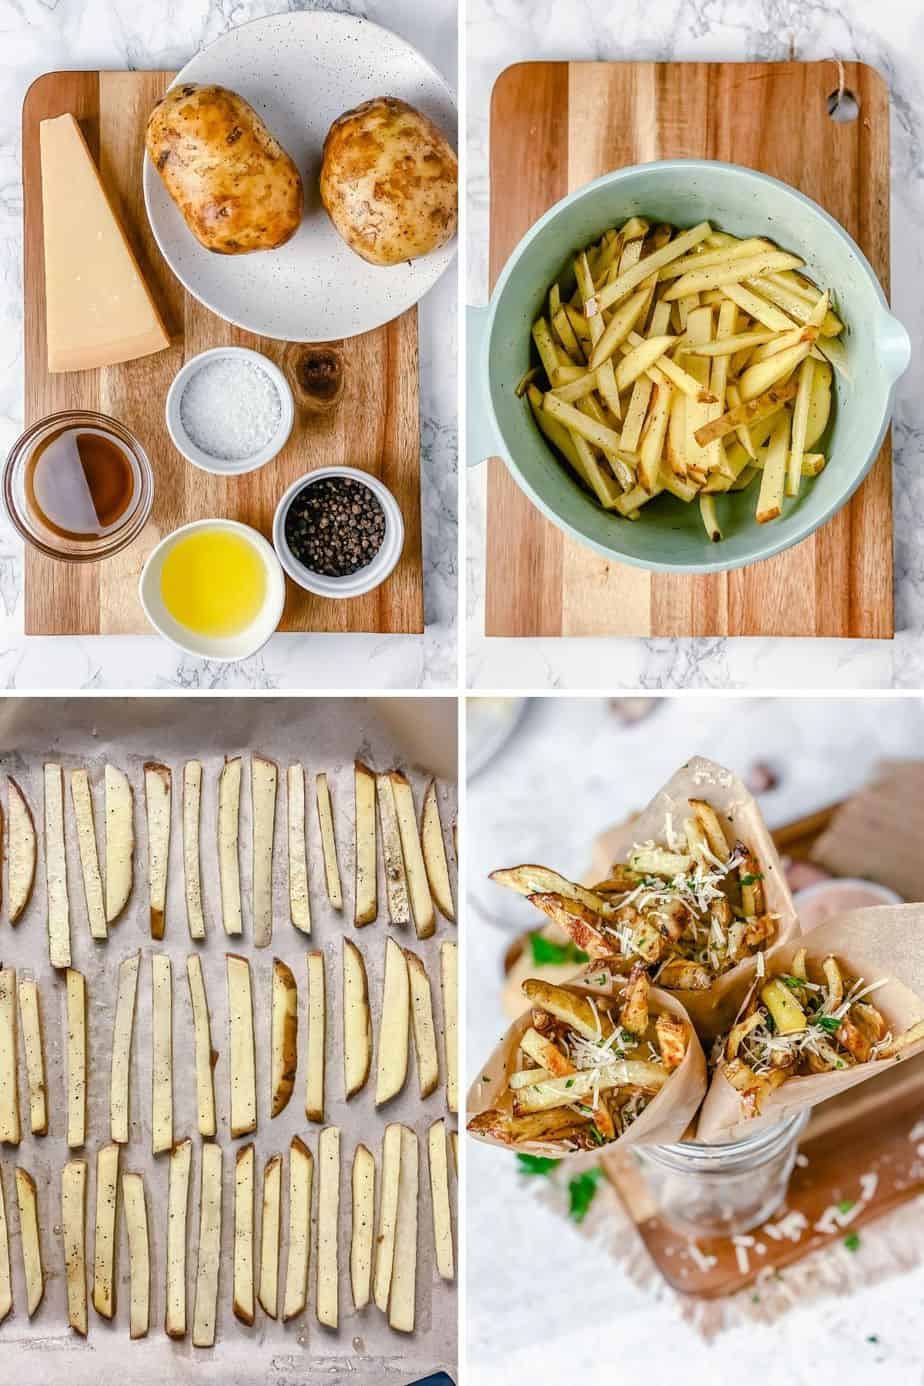 This recipe for Homemade Parmesan Truffle Fries is so good, no frying, easy and quick! Paired with delicious sweet paprika dipping sauce makes it a beautiful lazy evening dinner meal. The Yummy Bowl